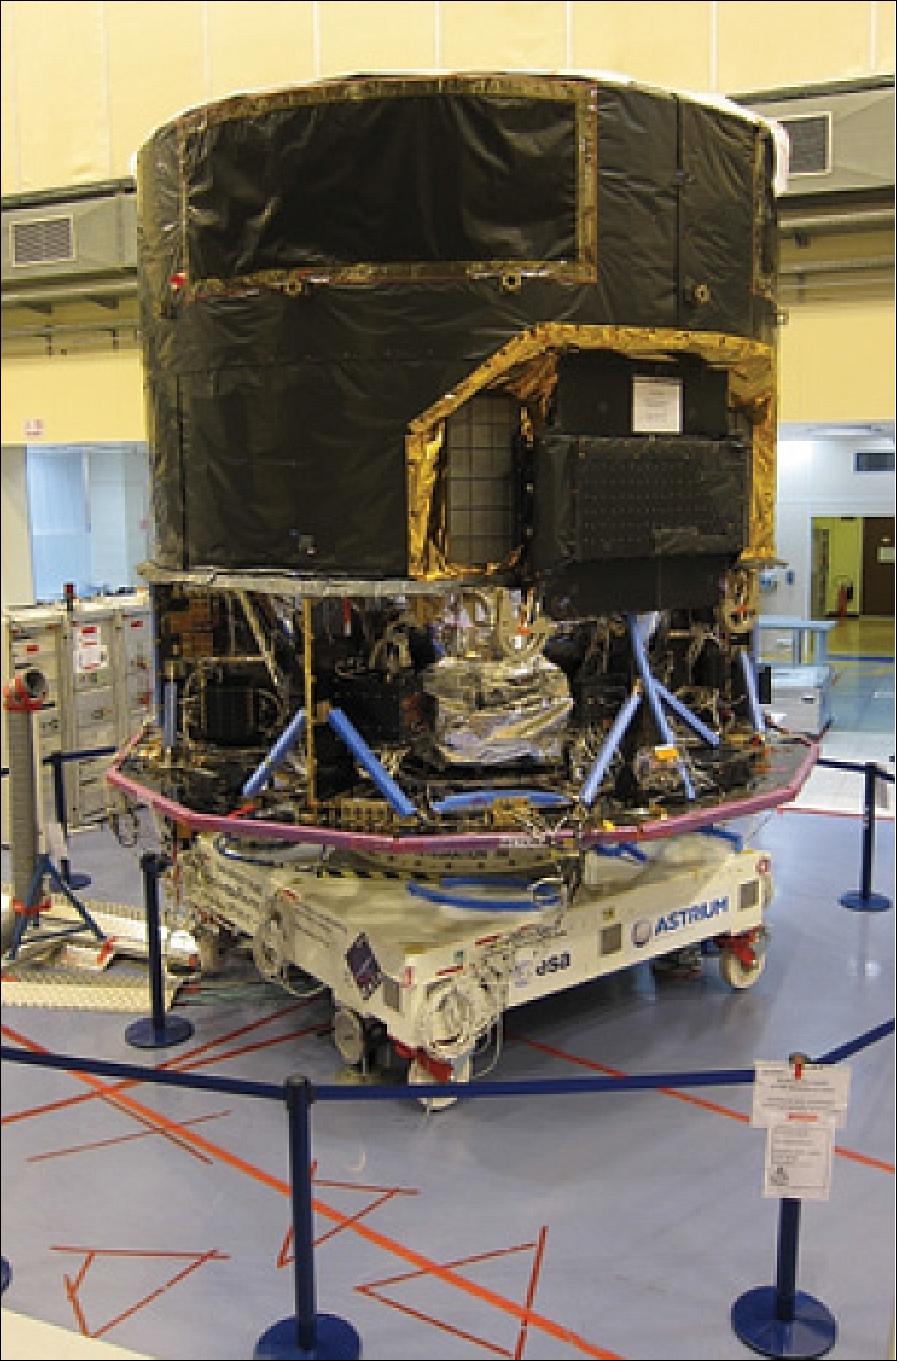 Figure 16: The Gaia flight model spacecraft undergoing final electrical tests at Astrium Toulouse in June 2013 (image credit: EADS Astrium)